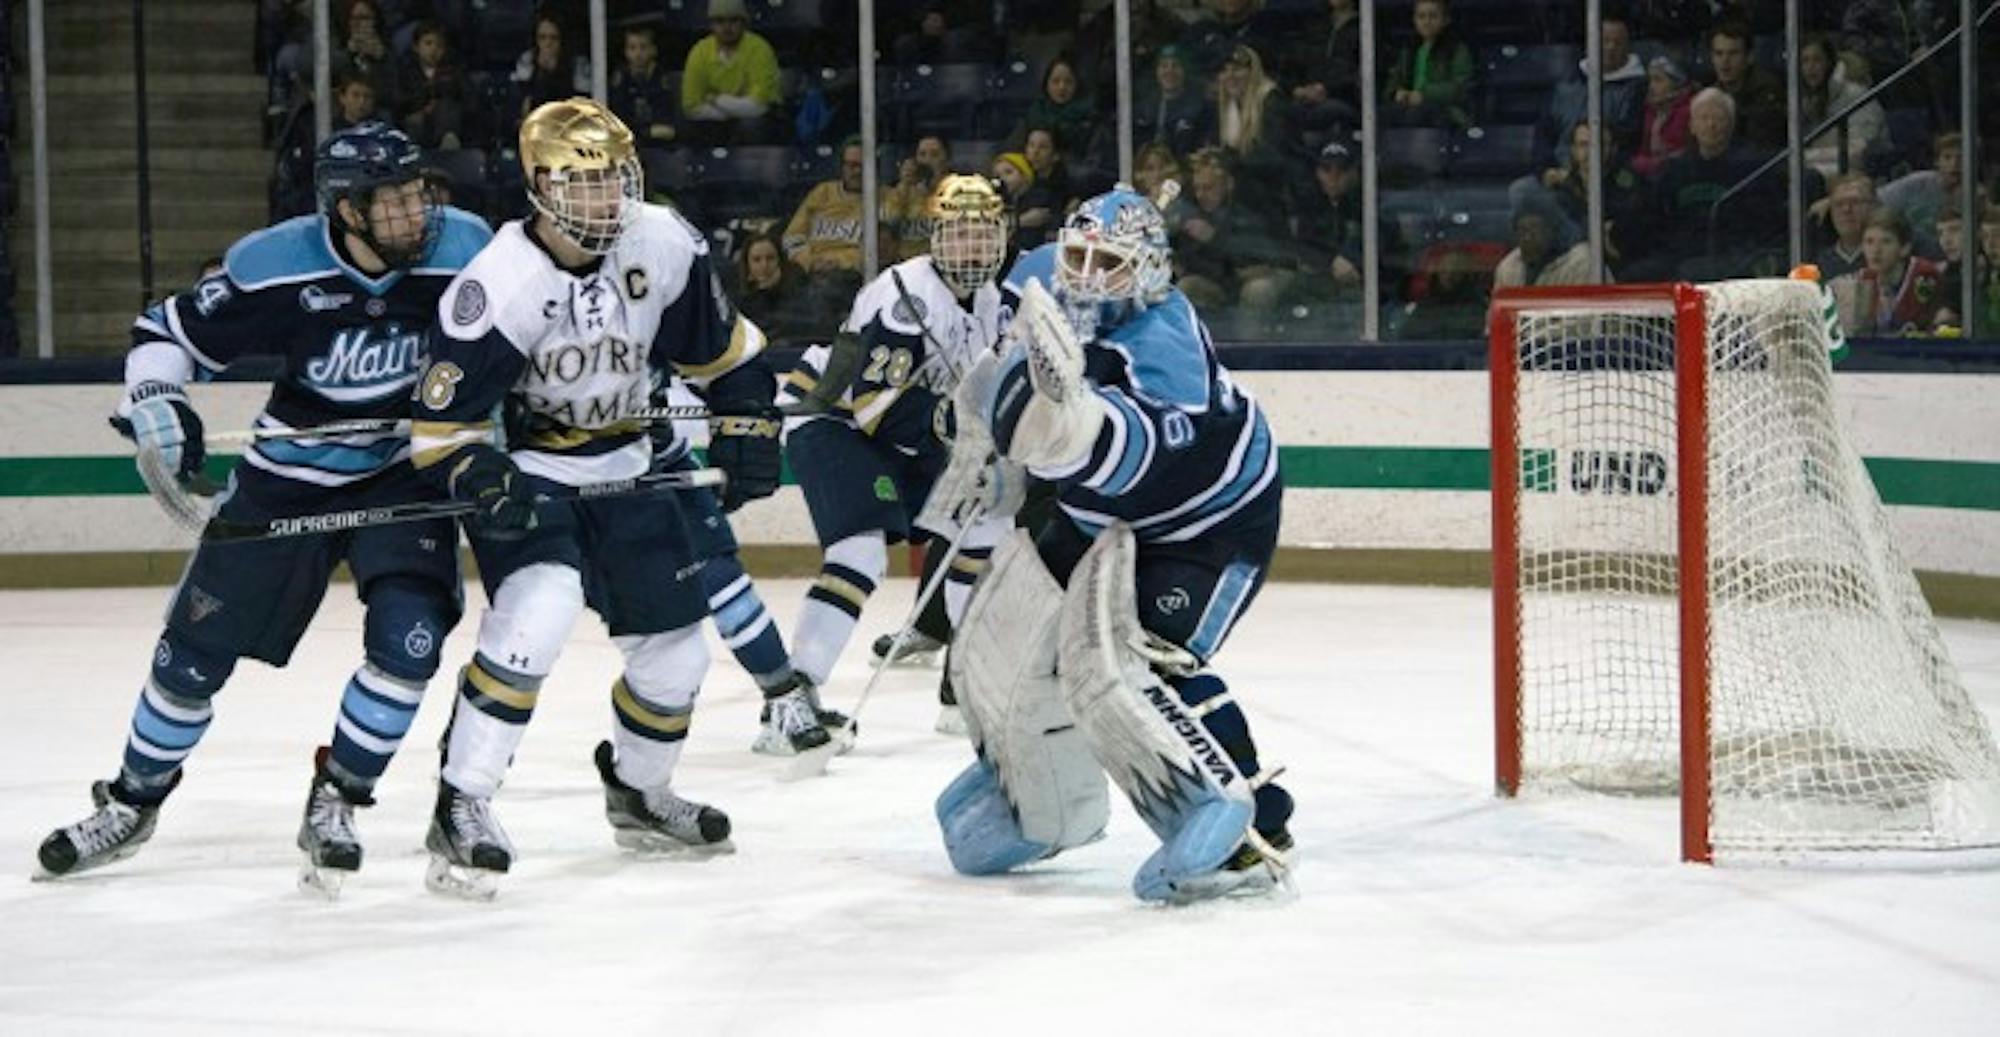 Irish senior captain Steven Fogarty crashes the net during Notre Dame’s 5-1 win over Maine on Feb. 13 at Compton Family Ice Arena.